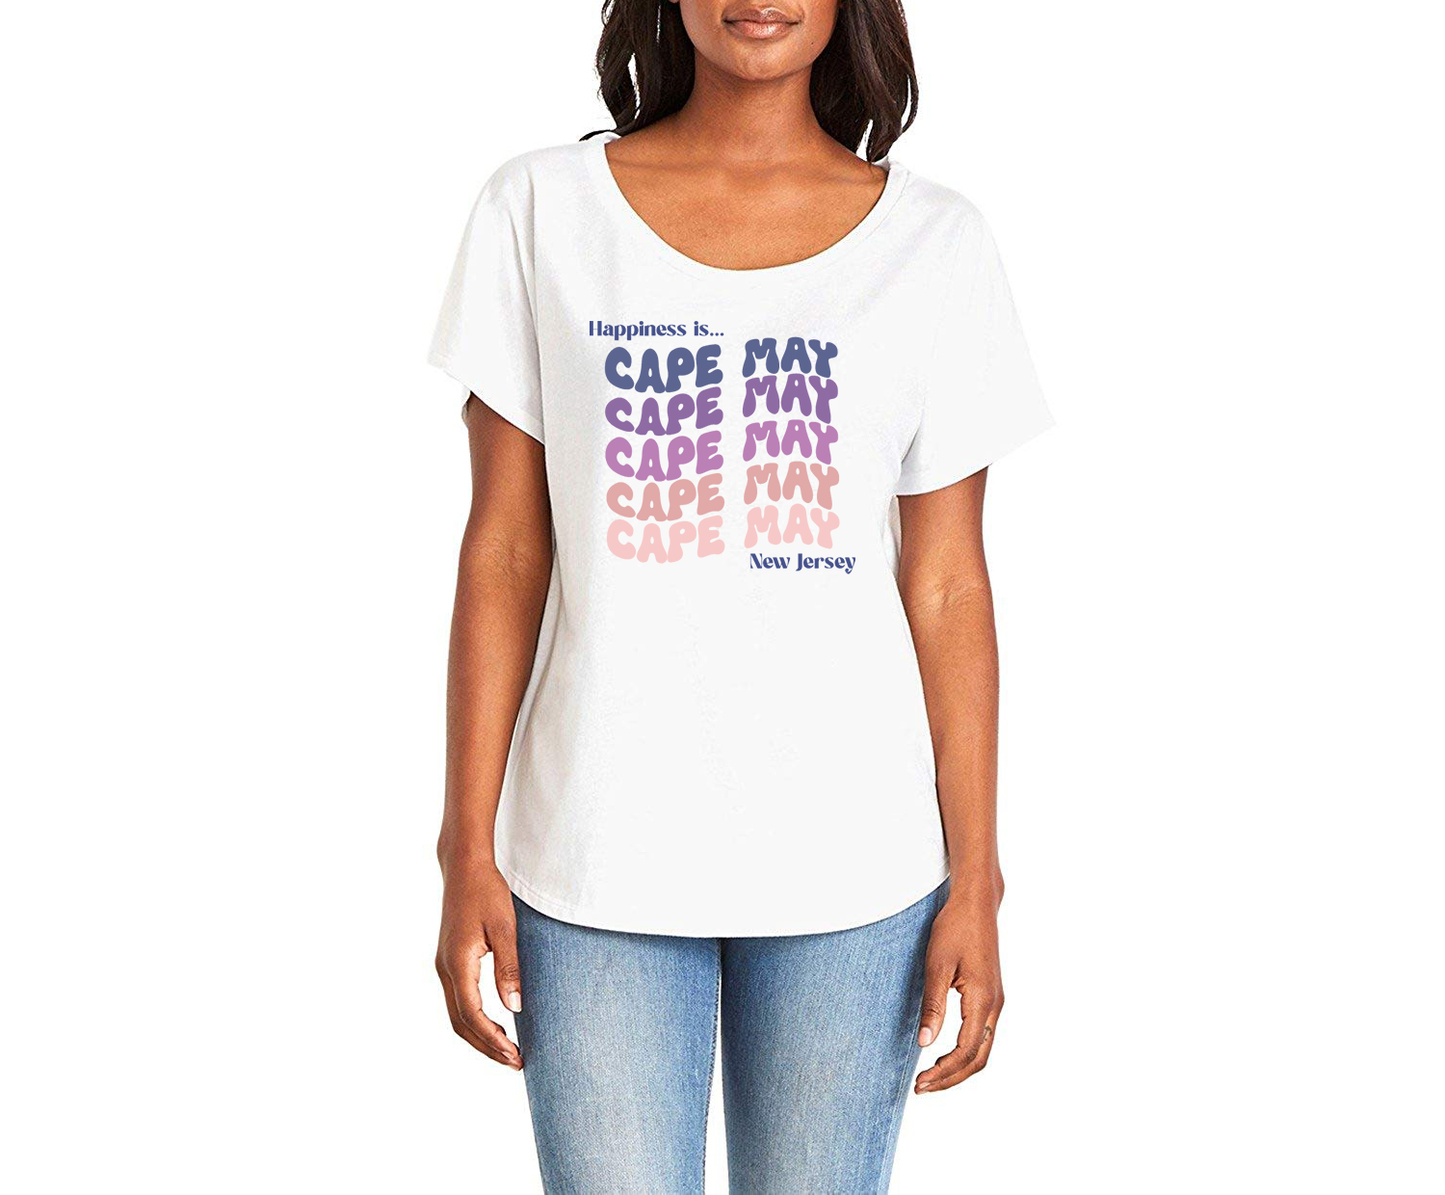 Happiness is Cape May Ladies Tee Shirt - White